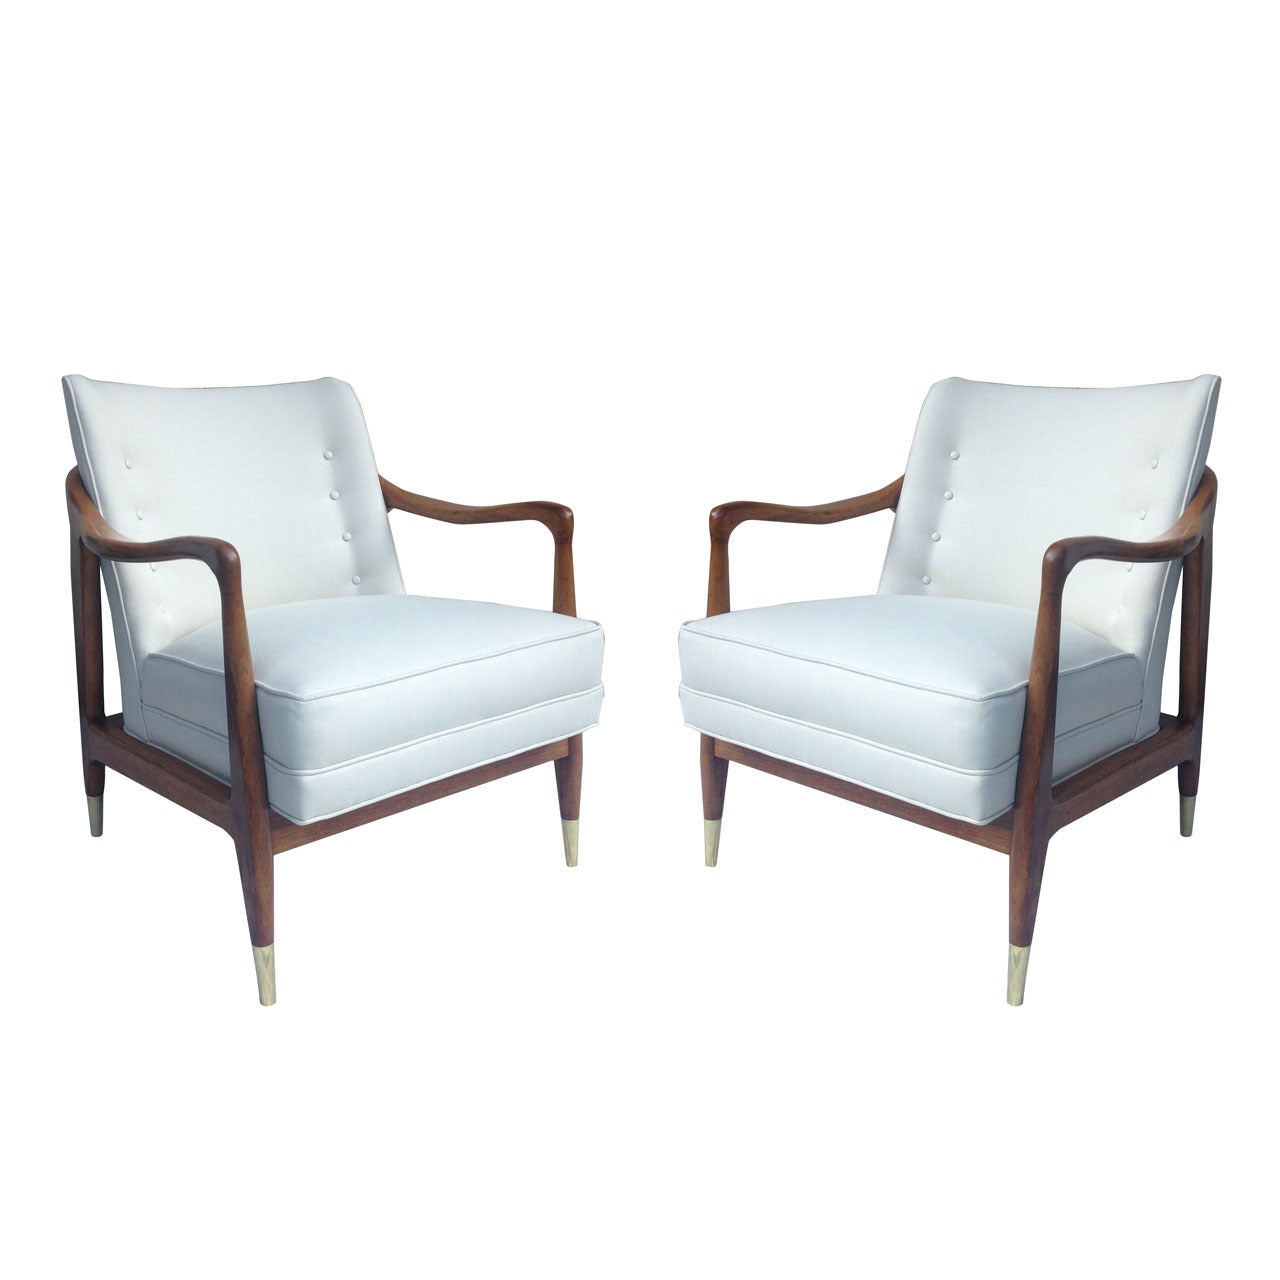 Pair of Club Chairs in the Style of Kofod Larson